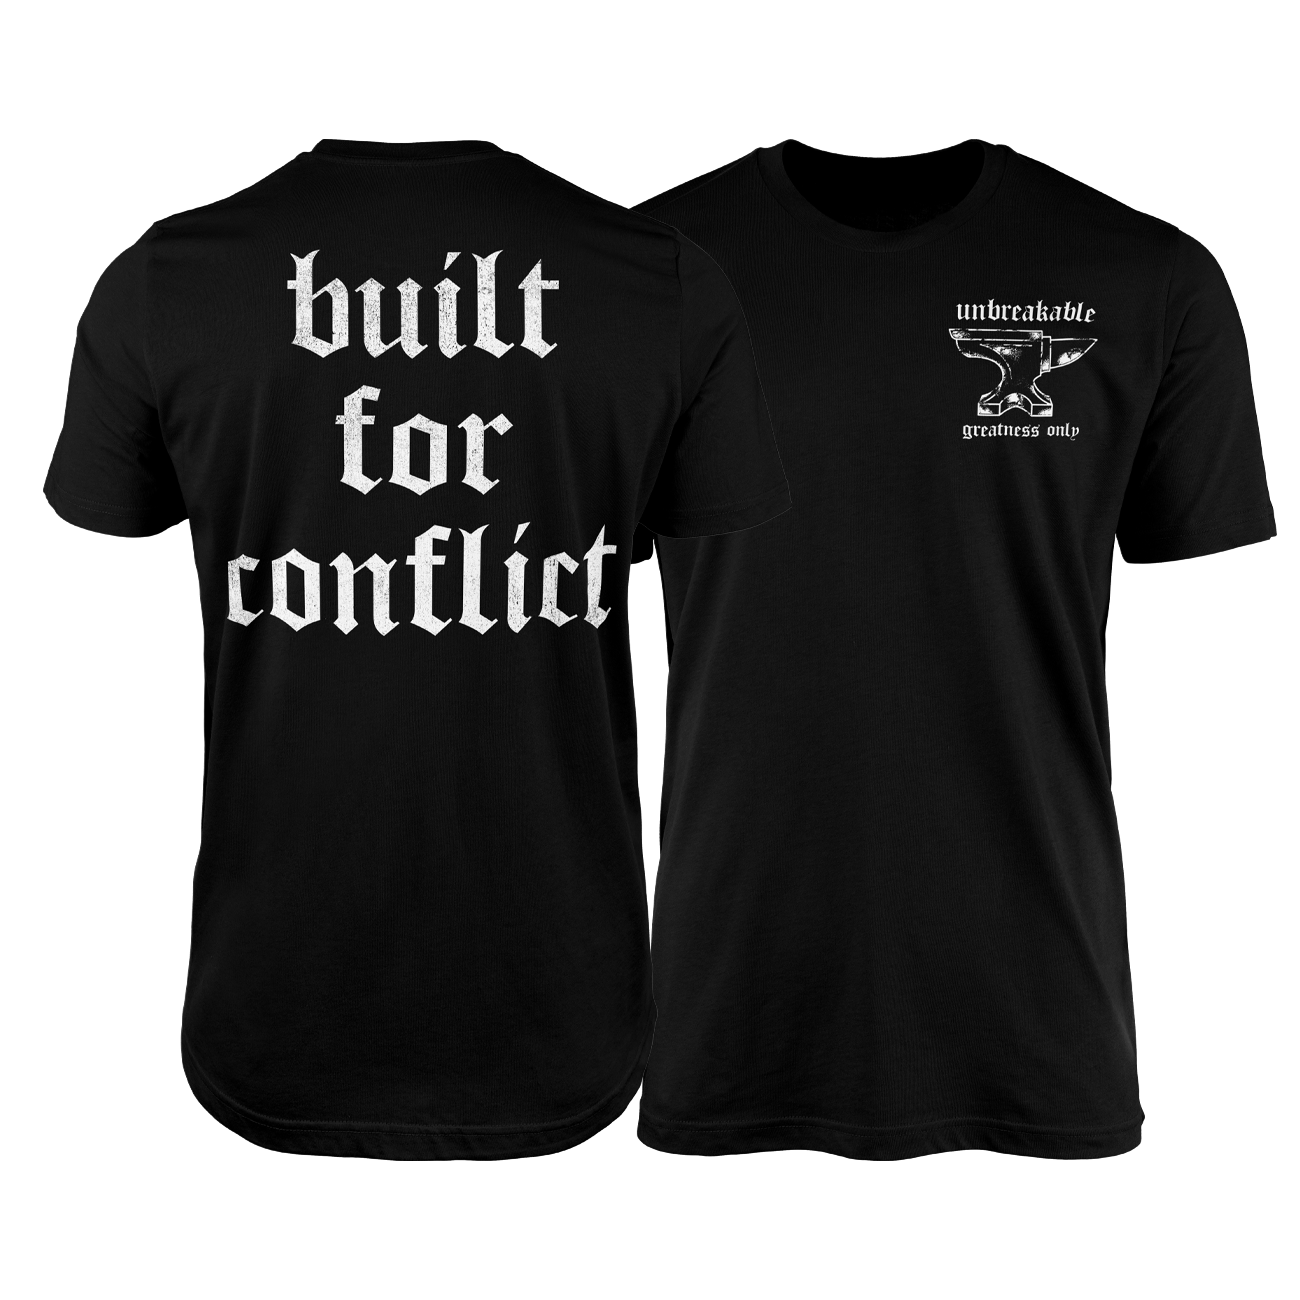 BUILT FOR CONFLICT